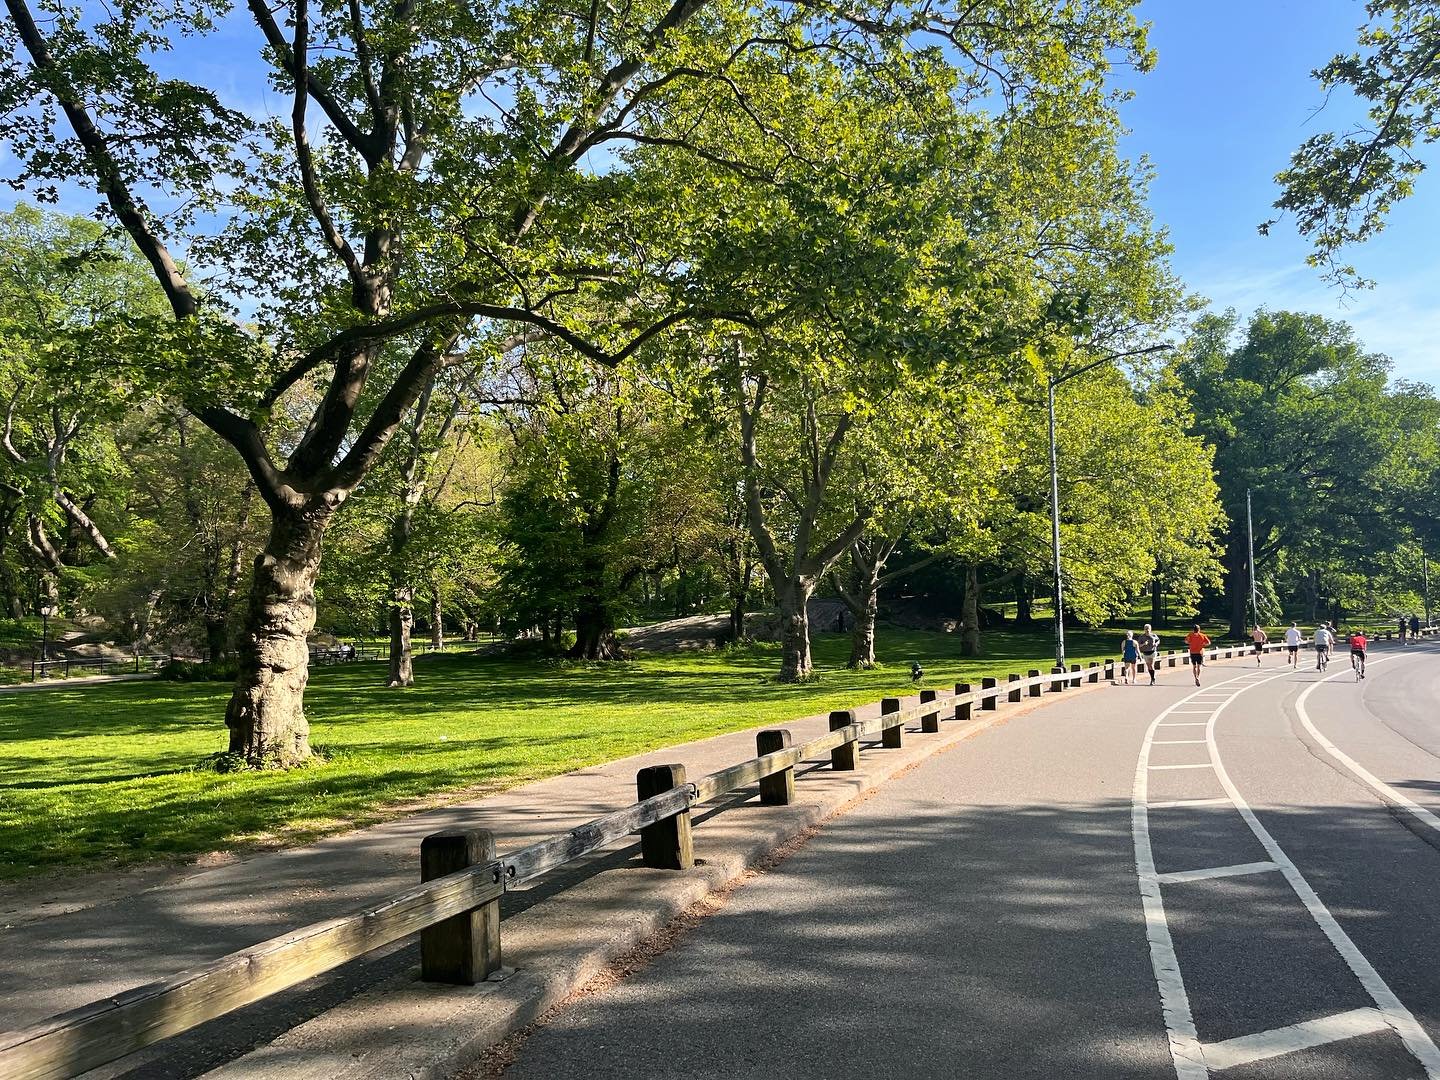 Stroll - Walk - Run -Ride

In a recent walk in @centralparknyc, I observed how the pathways were segmented by groups of activities. It in an odd way made me feel I belonged to a group of strangers with shared desires! Strangers were encouraging each 